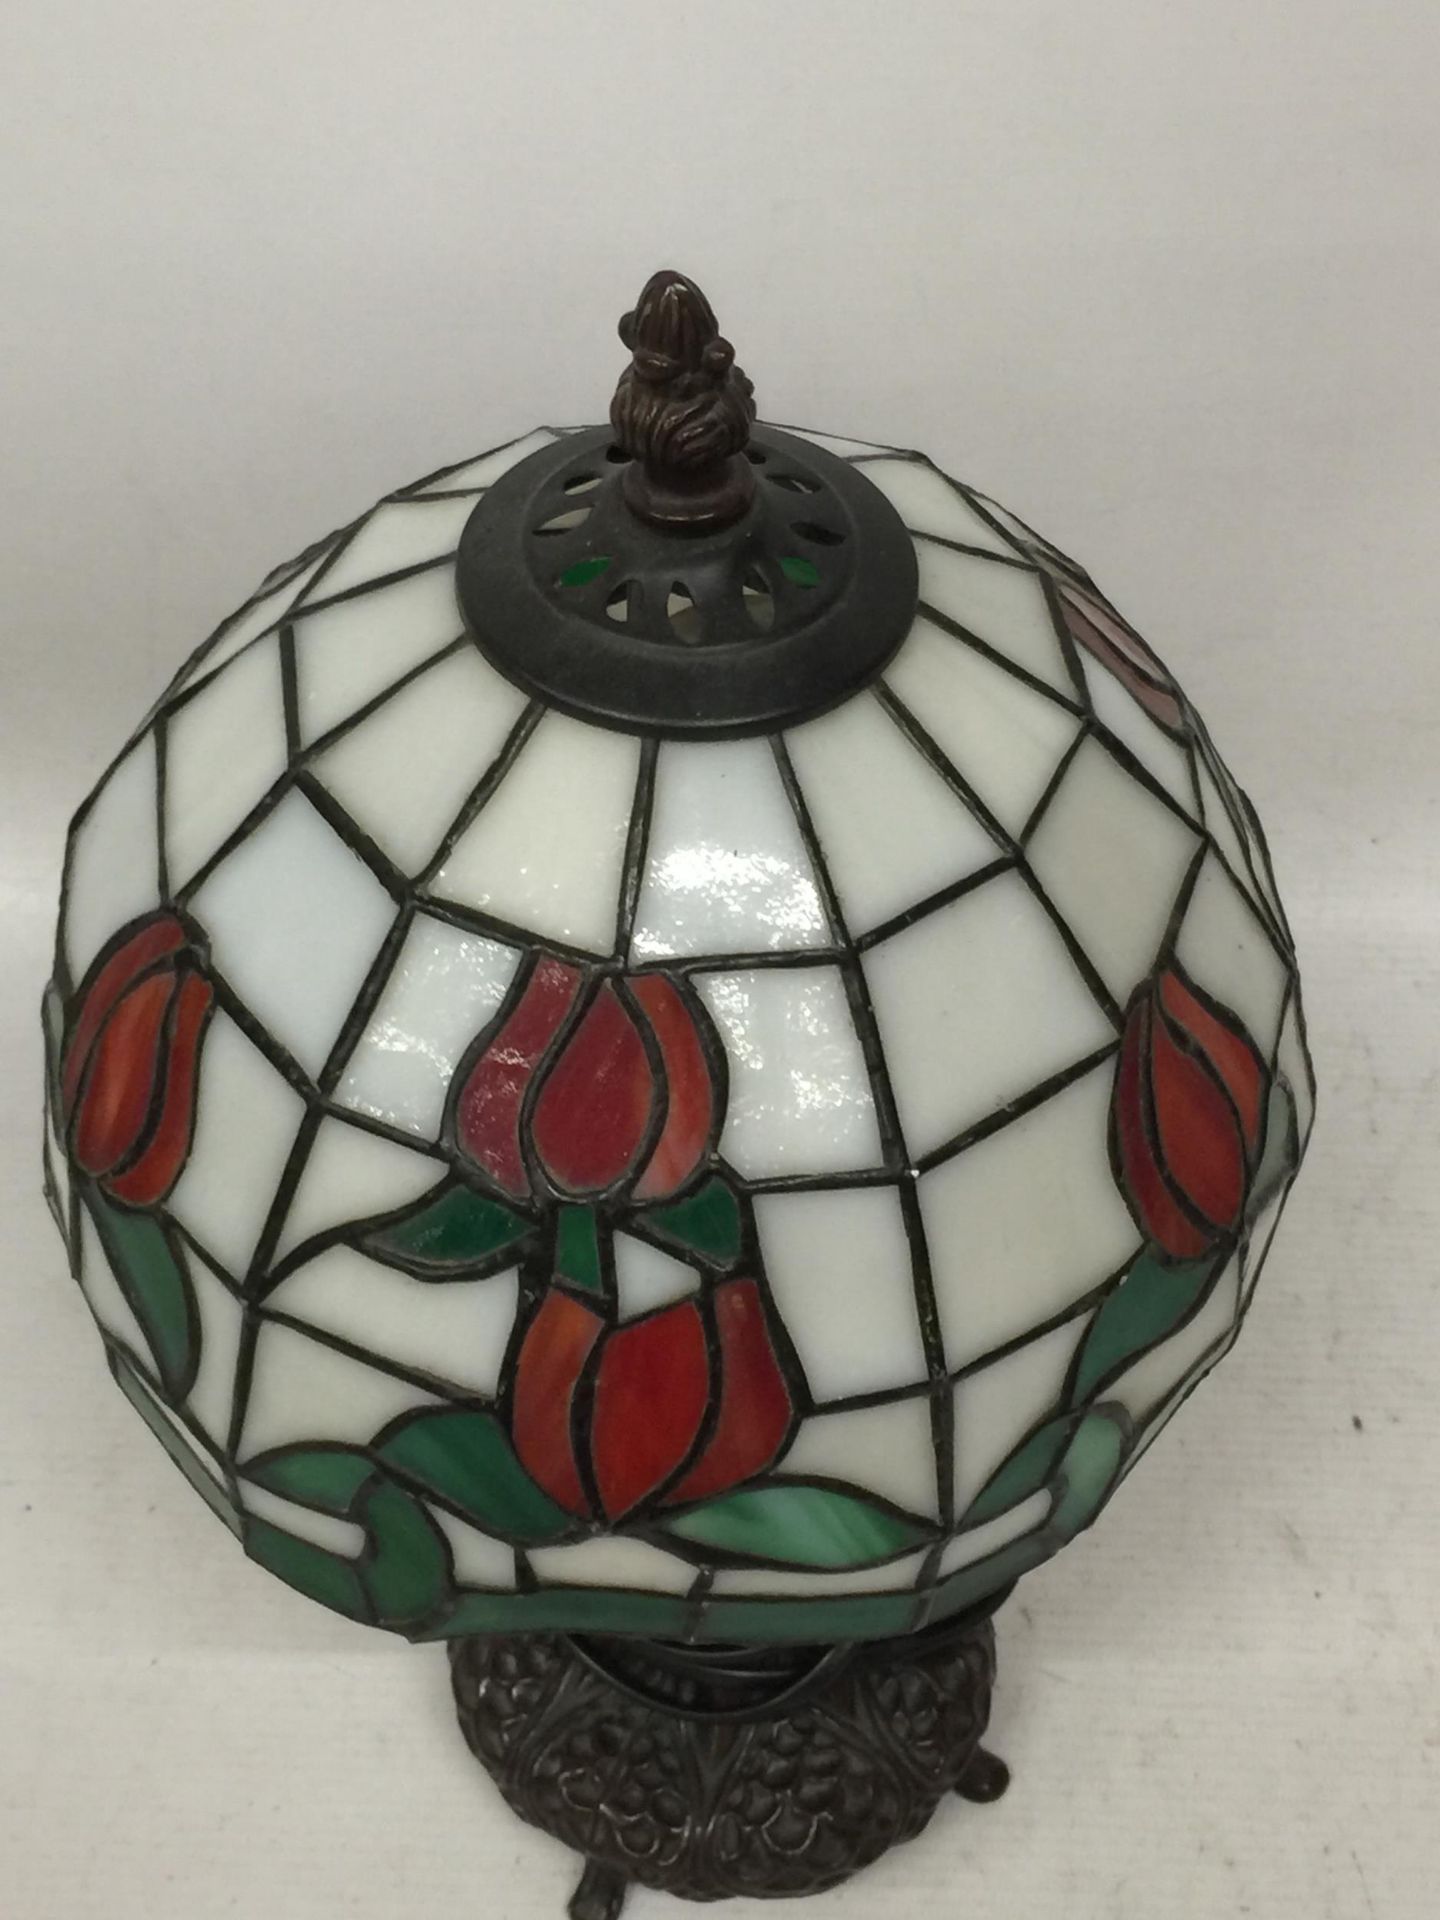 A TIFFANY STYLE TABLE LAMP AND SHADE - Image 3 of 3